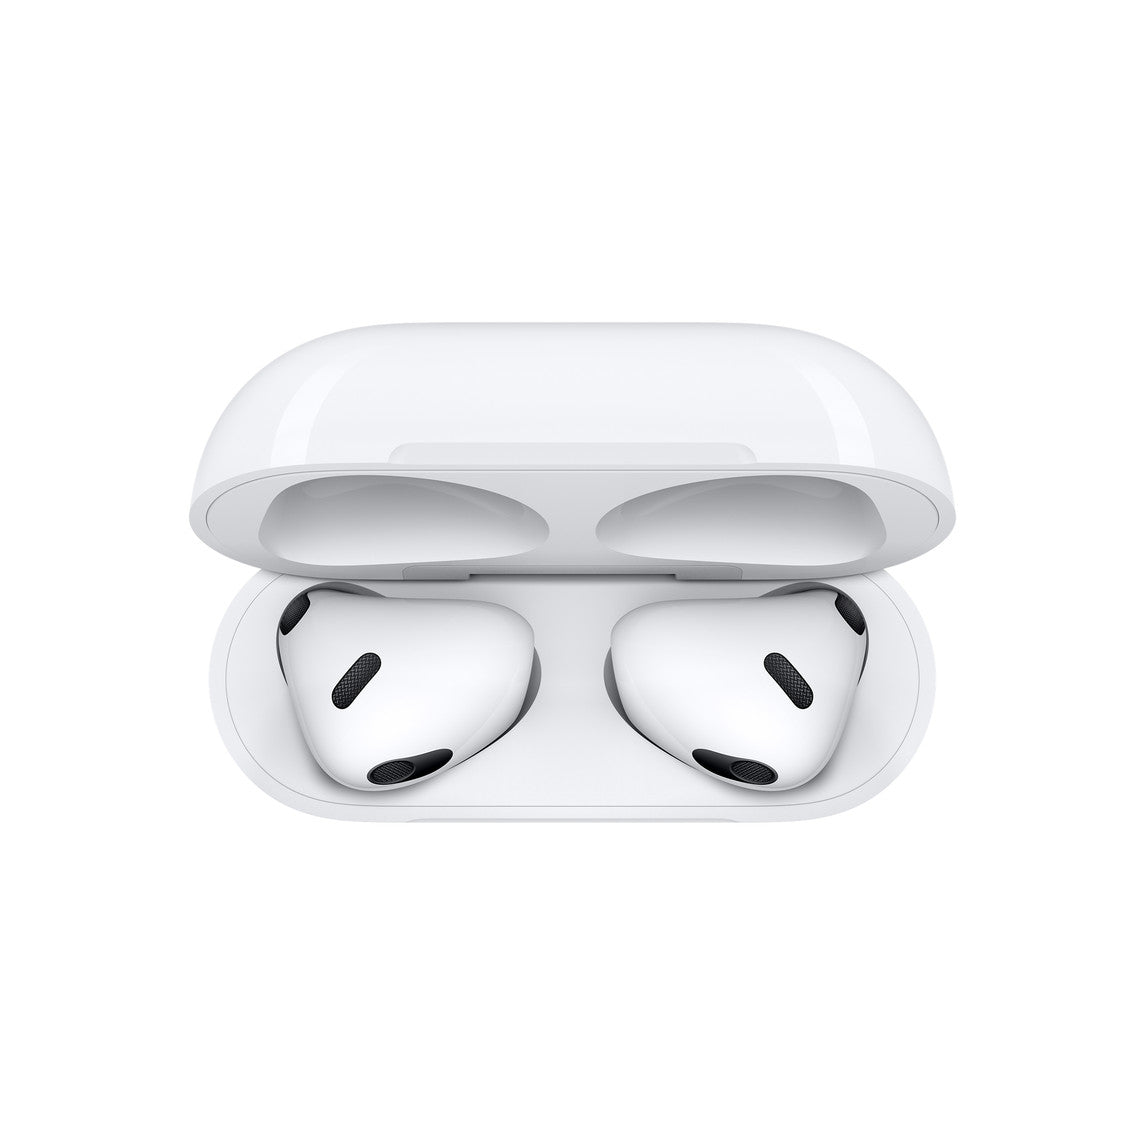 Apple Airpods (3rd generation) - Brand New